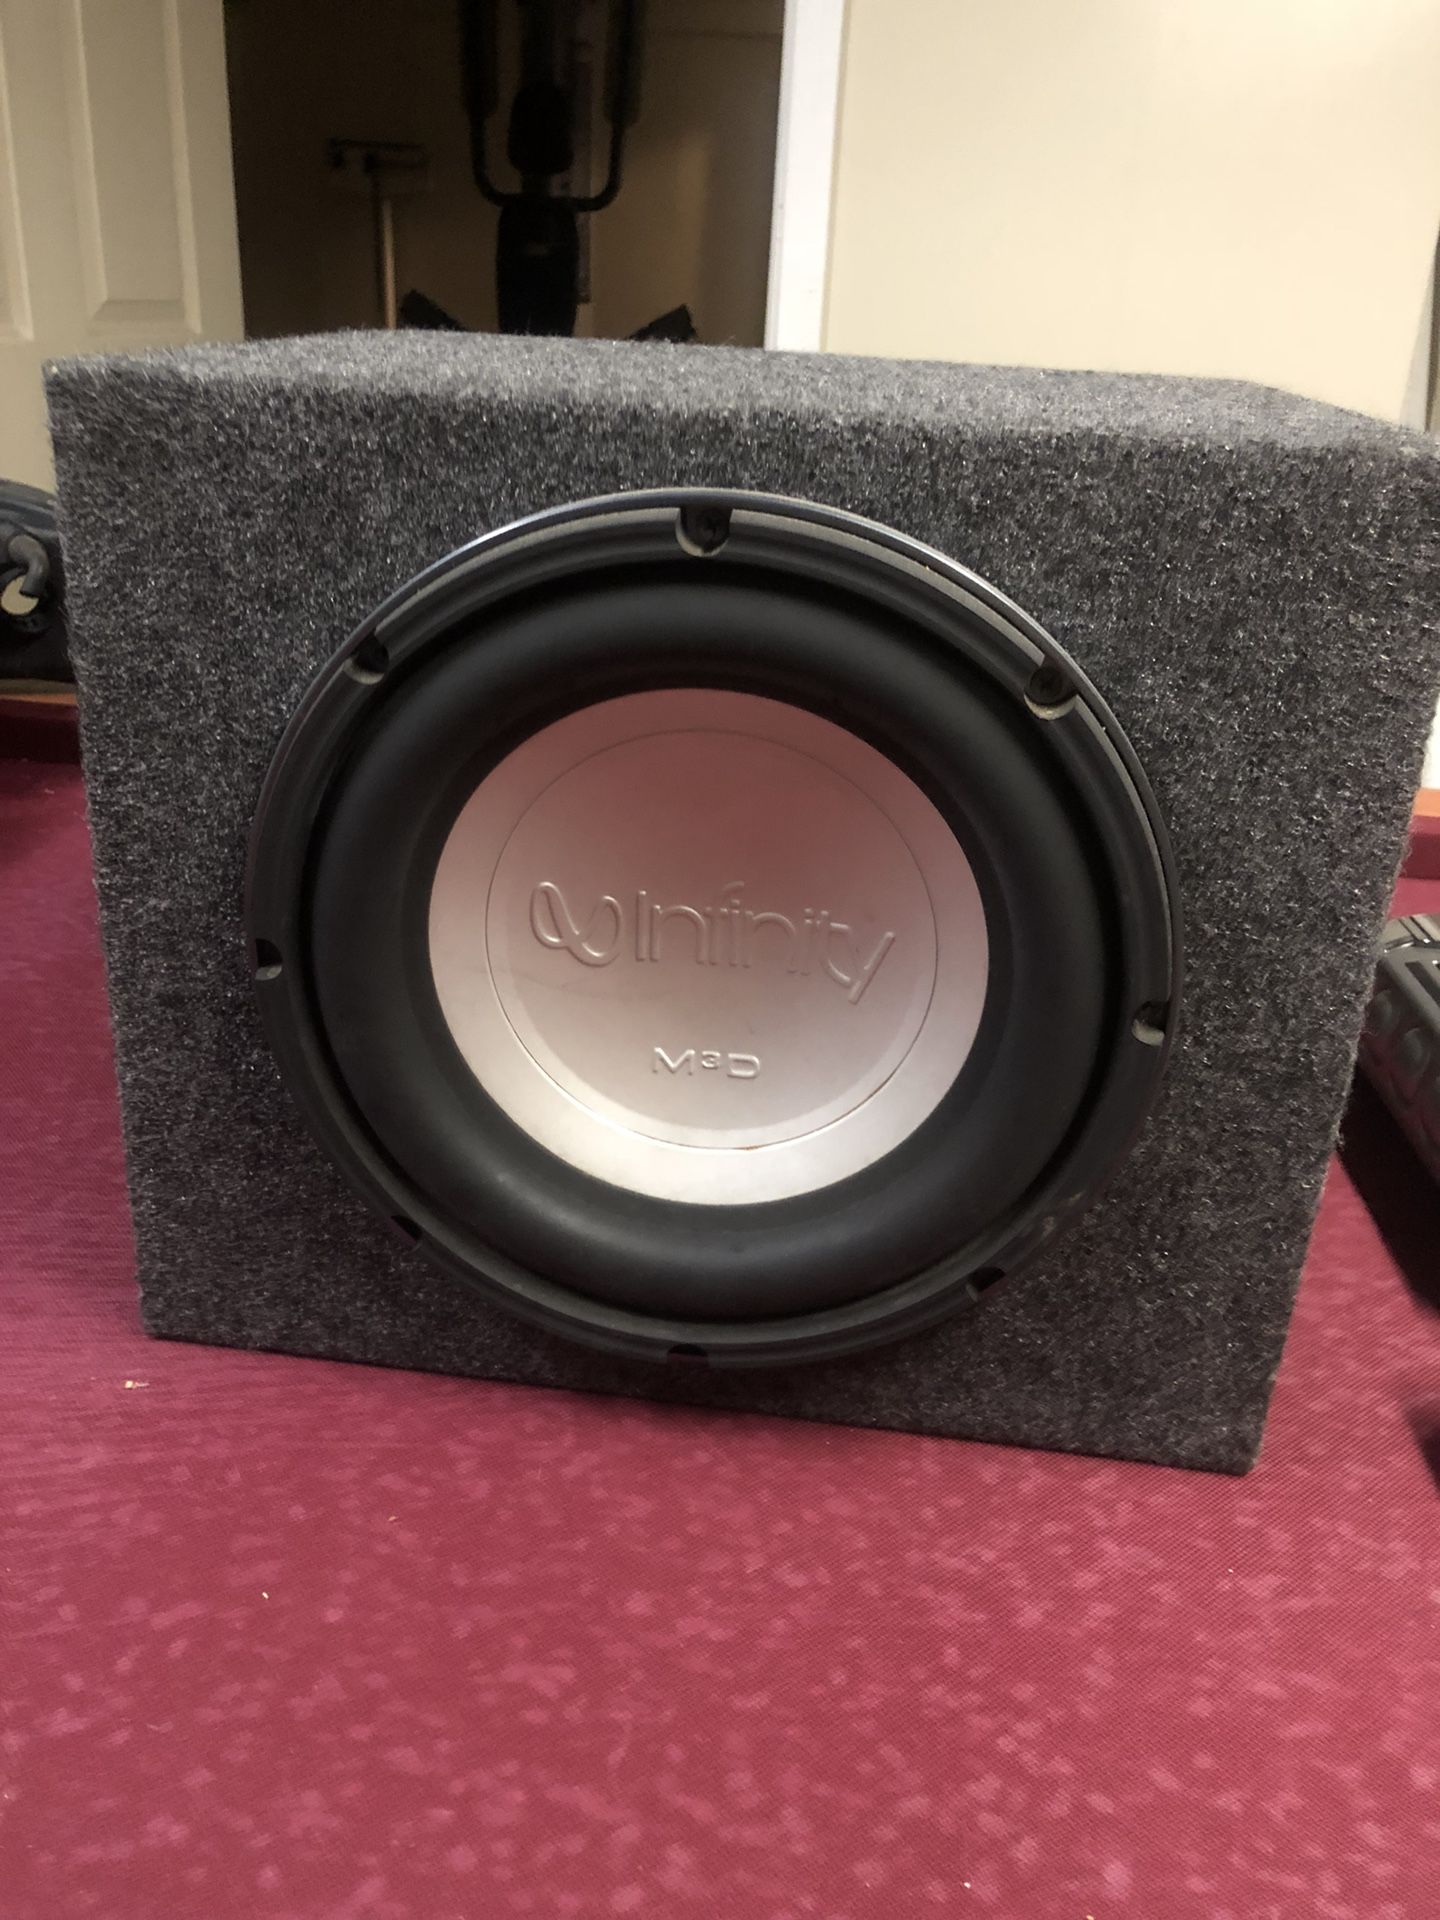 Infinity Perfect 10” VQ Subwoofer w/ Amp for Sale in Barkhamsted, CT - OfferUp